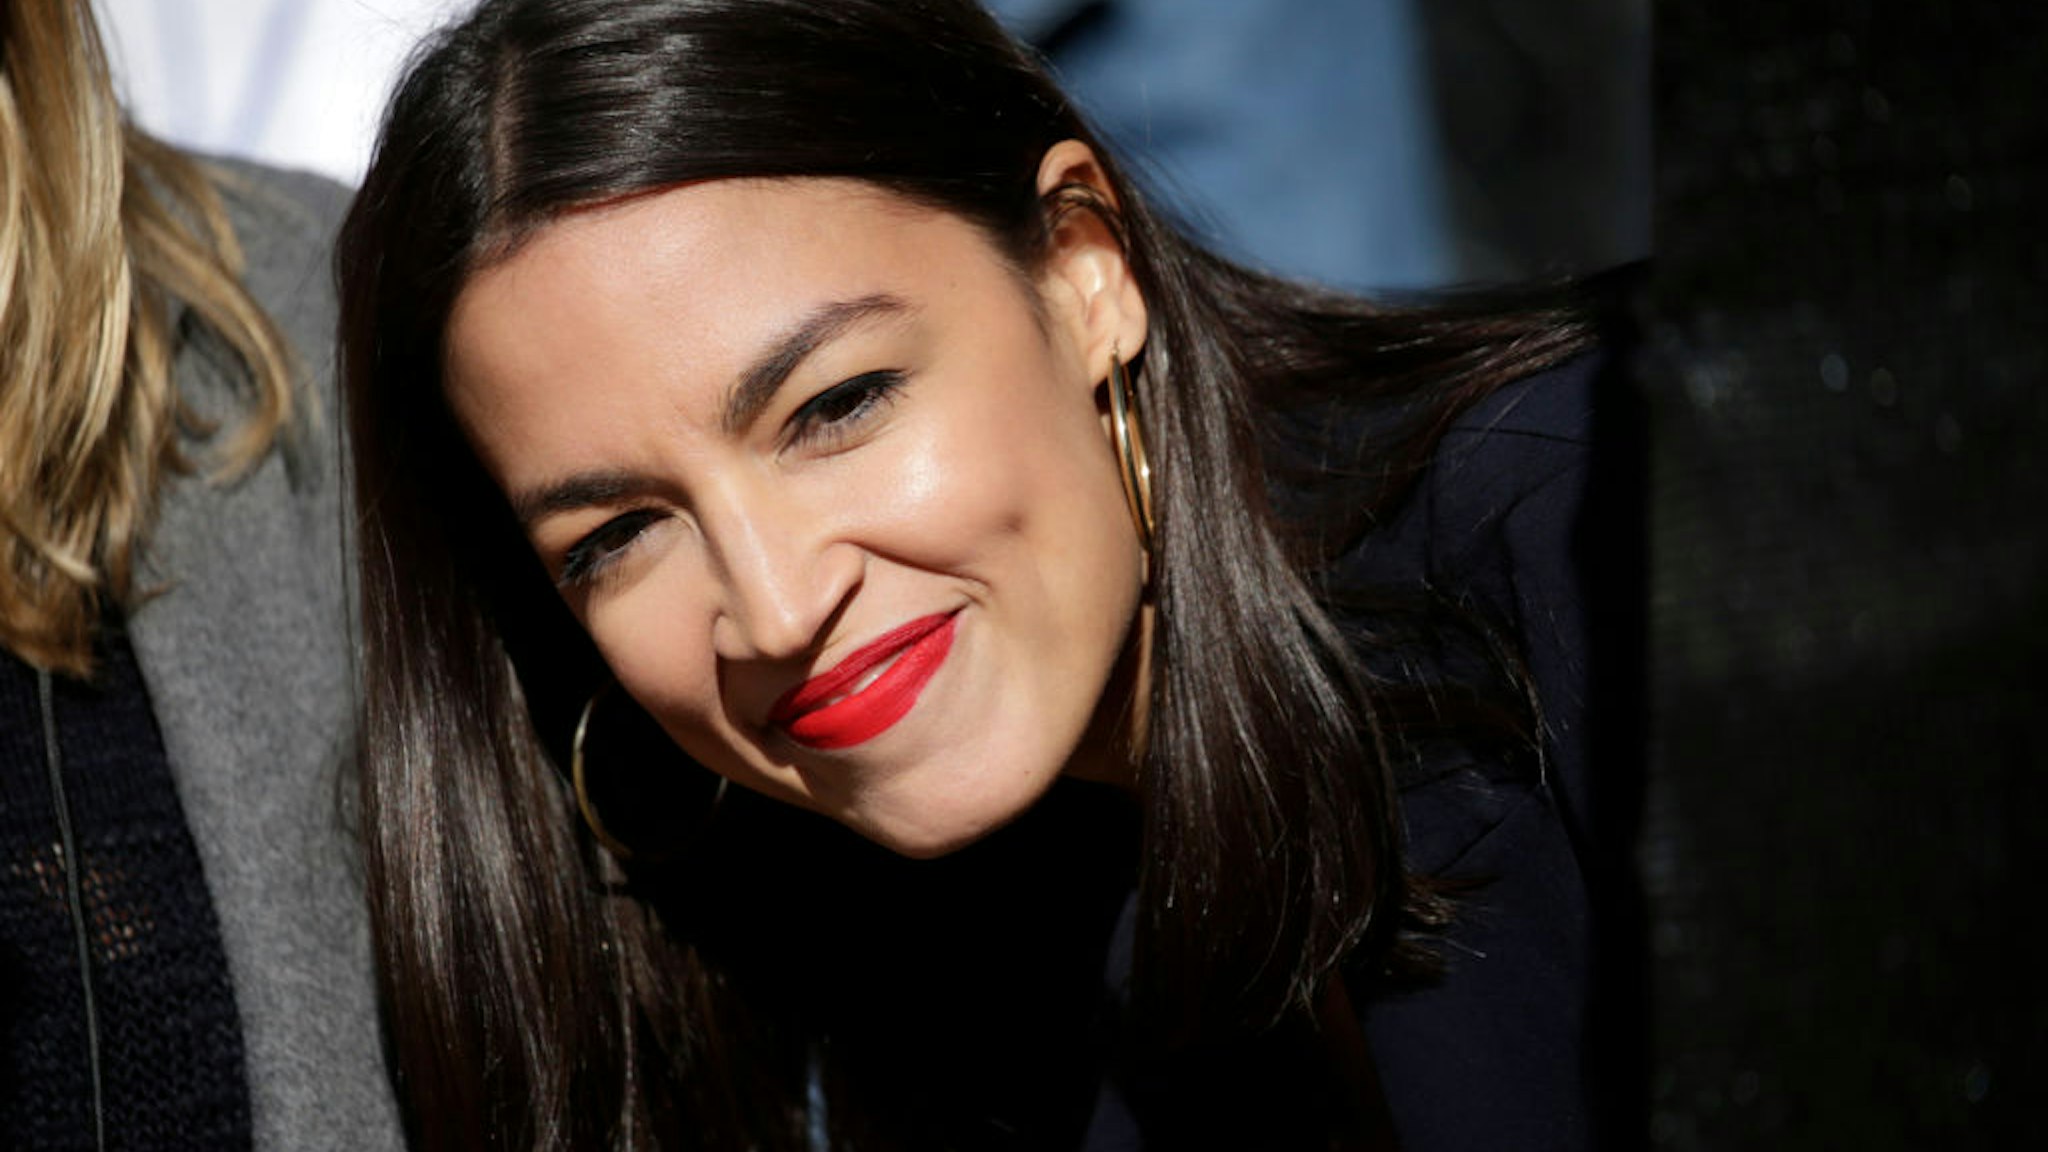 Rep. Alexandria Ocasio-Cortez (D-NY) attends a rally for Democratic presidential candidate, Sen. Bernie Sanders (I-VT) in Queensbridge Park on October 19, 2019 in the Queens borough of New York City.